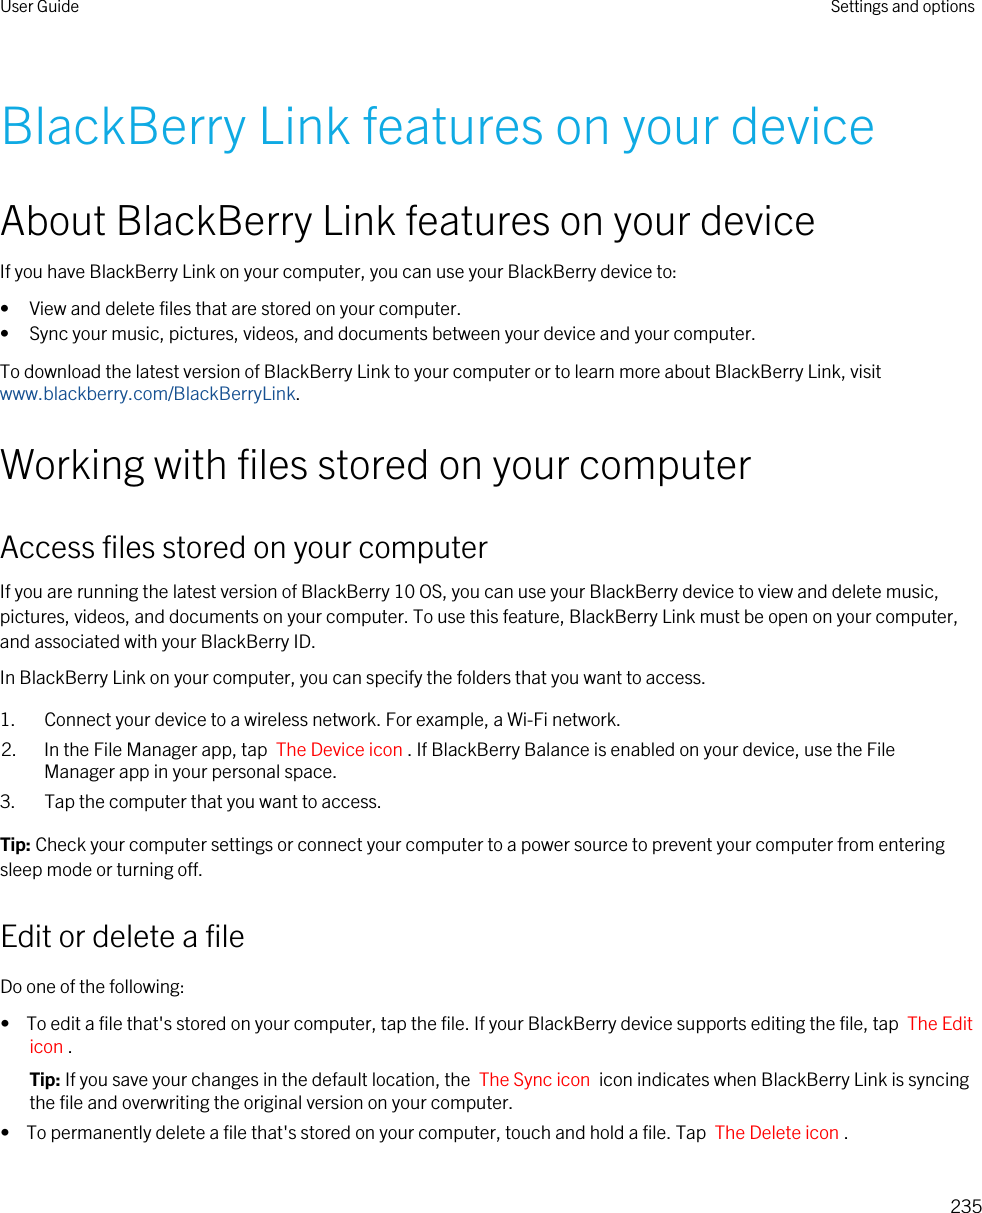 BlackBerry Link features on your deviceAbout BlackBerry Link features on your deviceIf you have BlackBerry Link on your computer, you can use your BlackBerry device to:• View and delete files that are stored on your computer.• Sync your music, pictures, videos, and documents between your device and your computer.To download the latest version of BlackBerry Link to your computer or to learn more about BlackBerry Link, visit www.blackberry.com/BlackBerryLink.Working with files stored on your computerAccess files stored on your computerIf you are running the latest version of BlackBerry 10 OS, you can use your BlackBerry device to view and delete music, pictures, videos, and documents on your computer. To use this feature, BlackBerry Link must be open on your computer, and associated with your BlackBerry ID.In BlackBerry Link on your computer, you can specify the folders that you want to access.1. Connect your device to a wireless network. For example, a Wi-Fi network.2. In the File Manager app, tap  The Device icon . If BlackBerry Balance is enabled on your device, use the File Manager app in your personal space.3. Tap the computer that you want to access.Tip: Check your computer settings or connect your computer to a power source to prevent your computer from entering sleep mode or turning off.Edit or delete a fileDo one of the following:•  To edit a file that&apos;s stored on your computer, tap the file. If your BlackBerry device supports editing the file, tap  The Edit icon .Tip: If you save your changes in the default location, the  The Sync icon  icon indicates when BlackBerry Link is syncing the file and overwriting the original version on your computer.•  To permanently delete a file that&apos;s stored on your computer, touch and hold a file. Tap  The Delete icon .User Guide Settings and options235